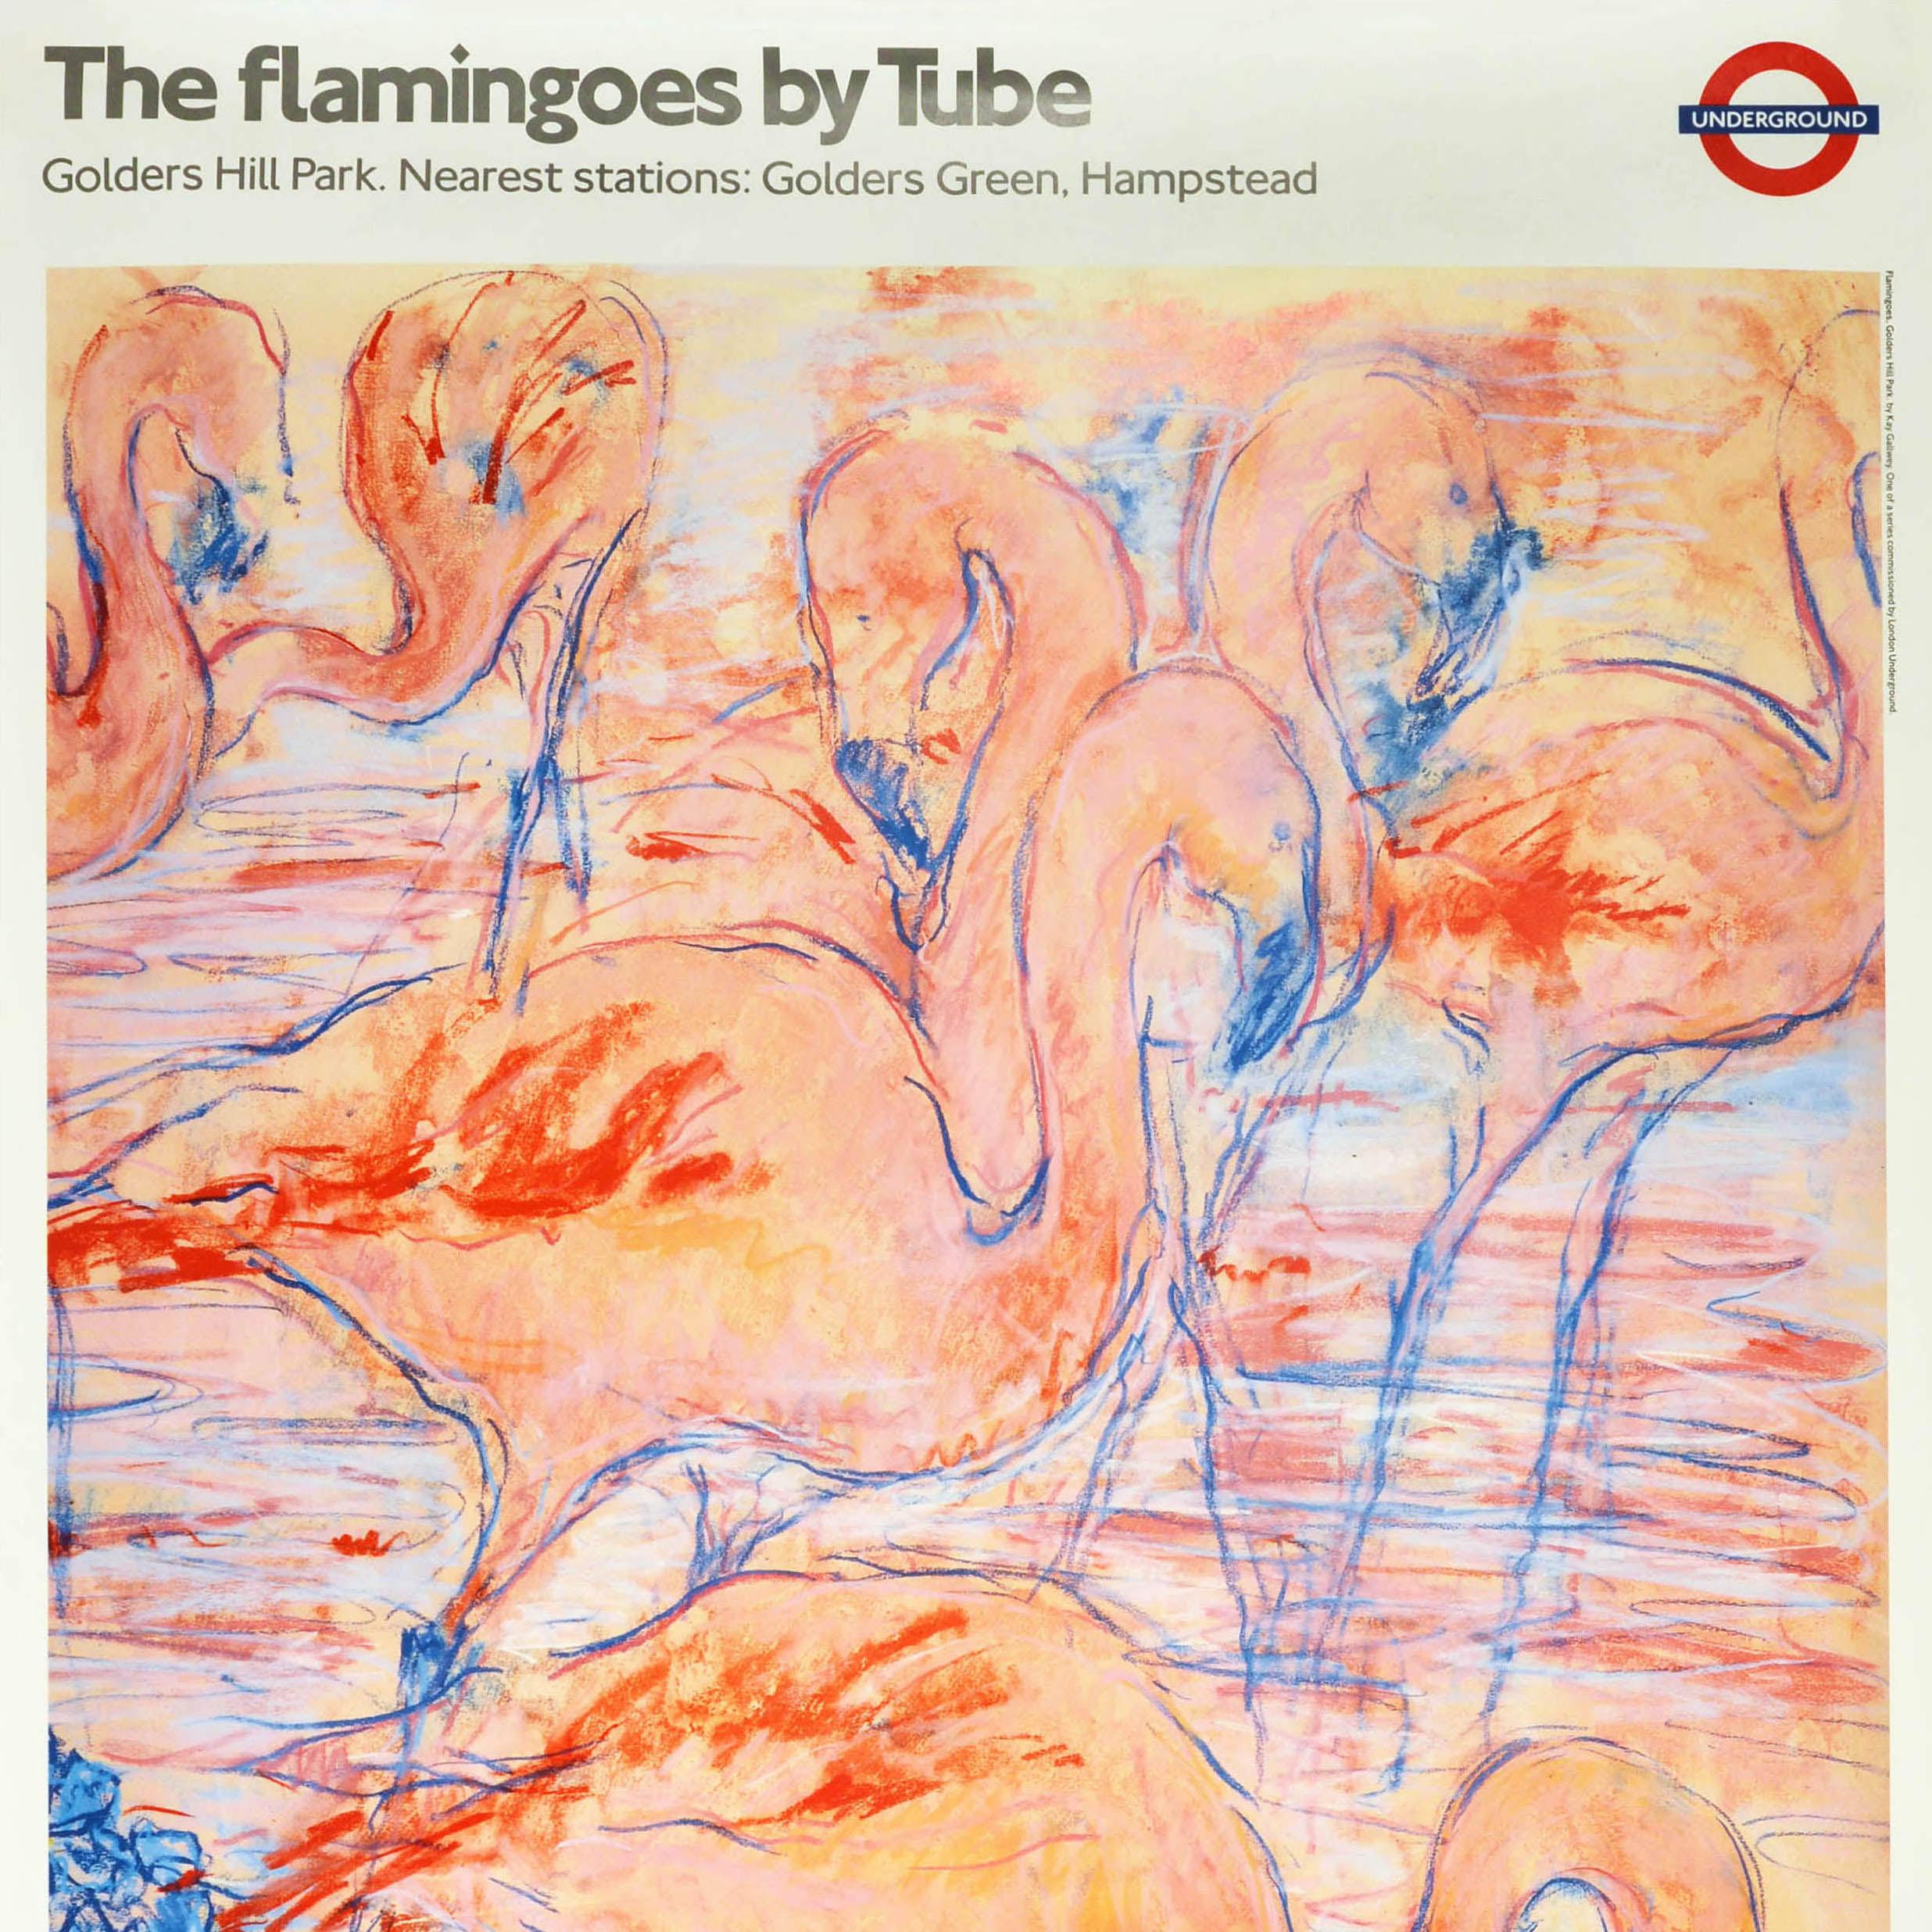 Original Vintage London Underground Poster Flamingoes By Tube Golders Hill Park  - Beige Print by Unknown